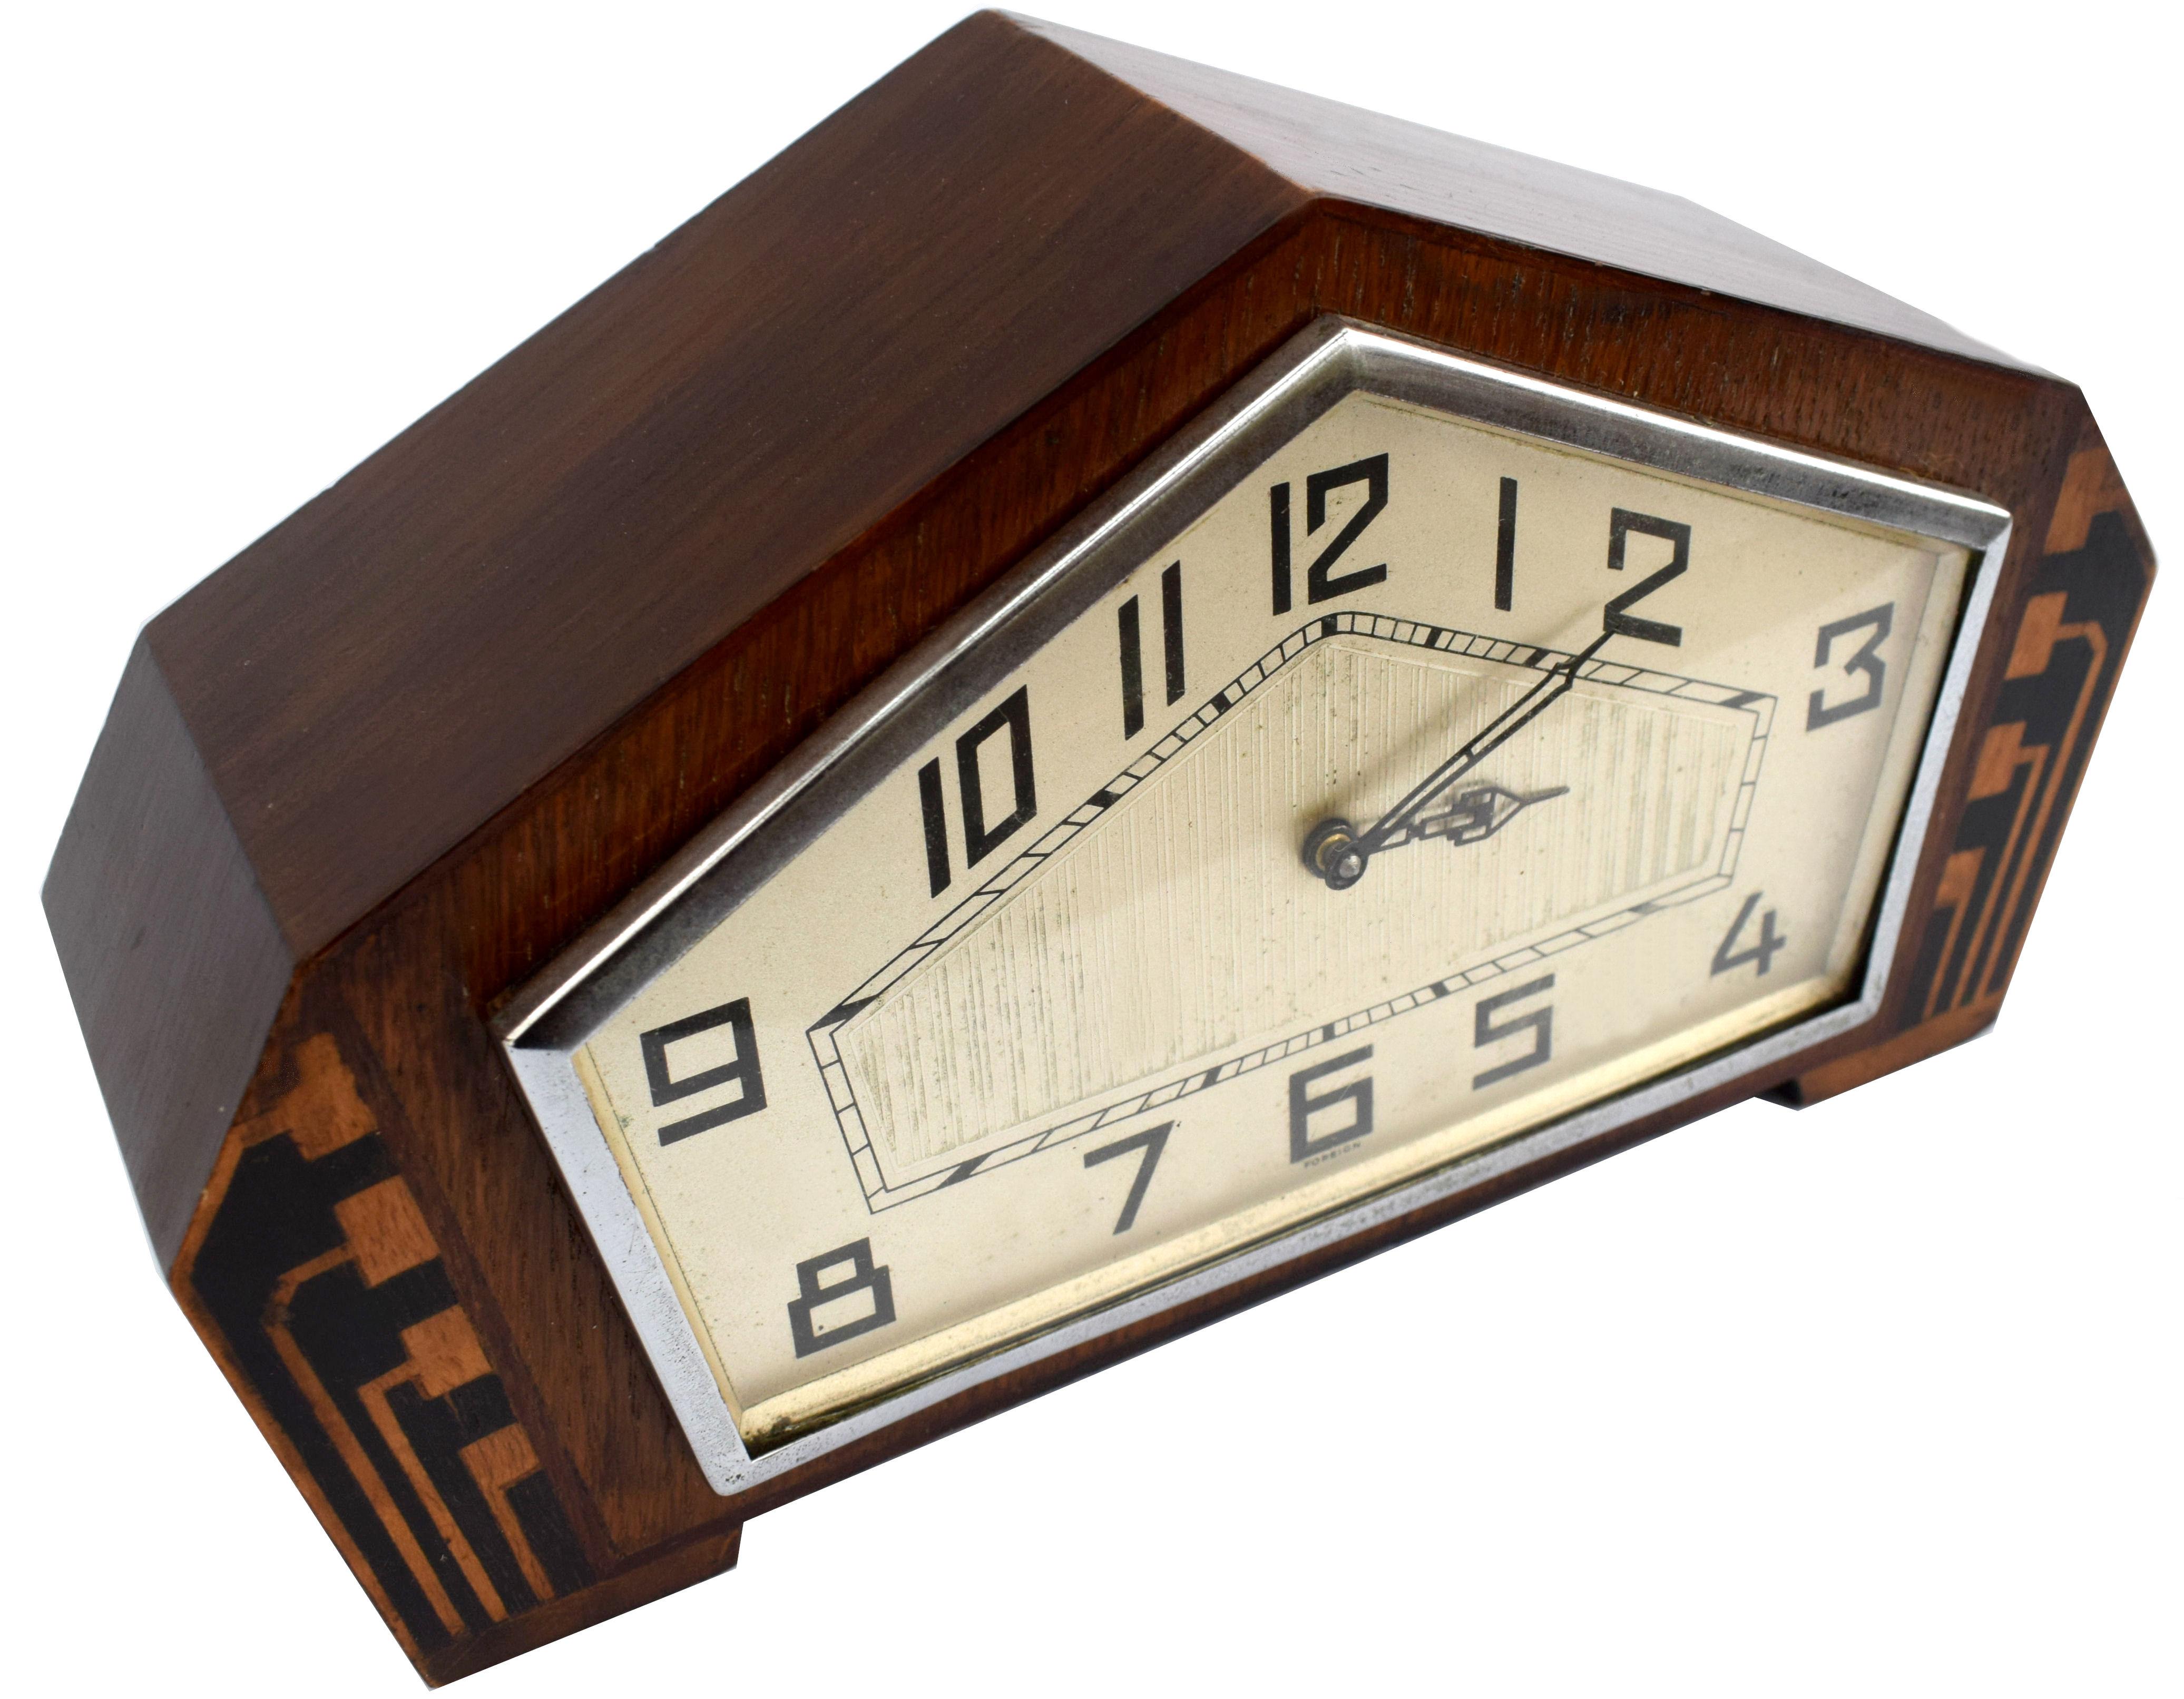 For your consideration is this very stylish Art Deco walnut mantle clock dating to the 1930's. Originating from England but marked to the dial foreign this clock can't be mistaken for any other era can it. The engine turned Champaign coloured dial